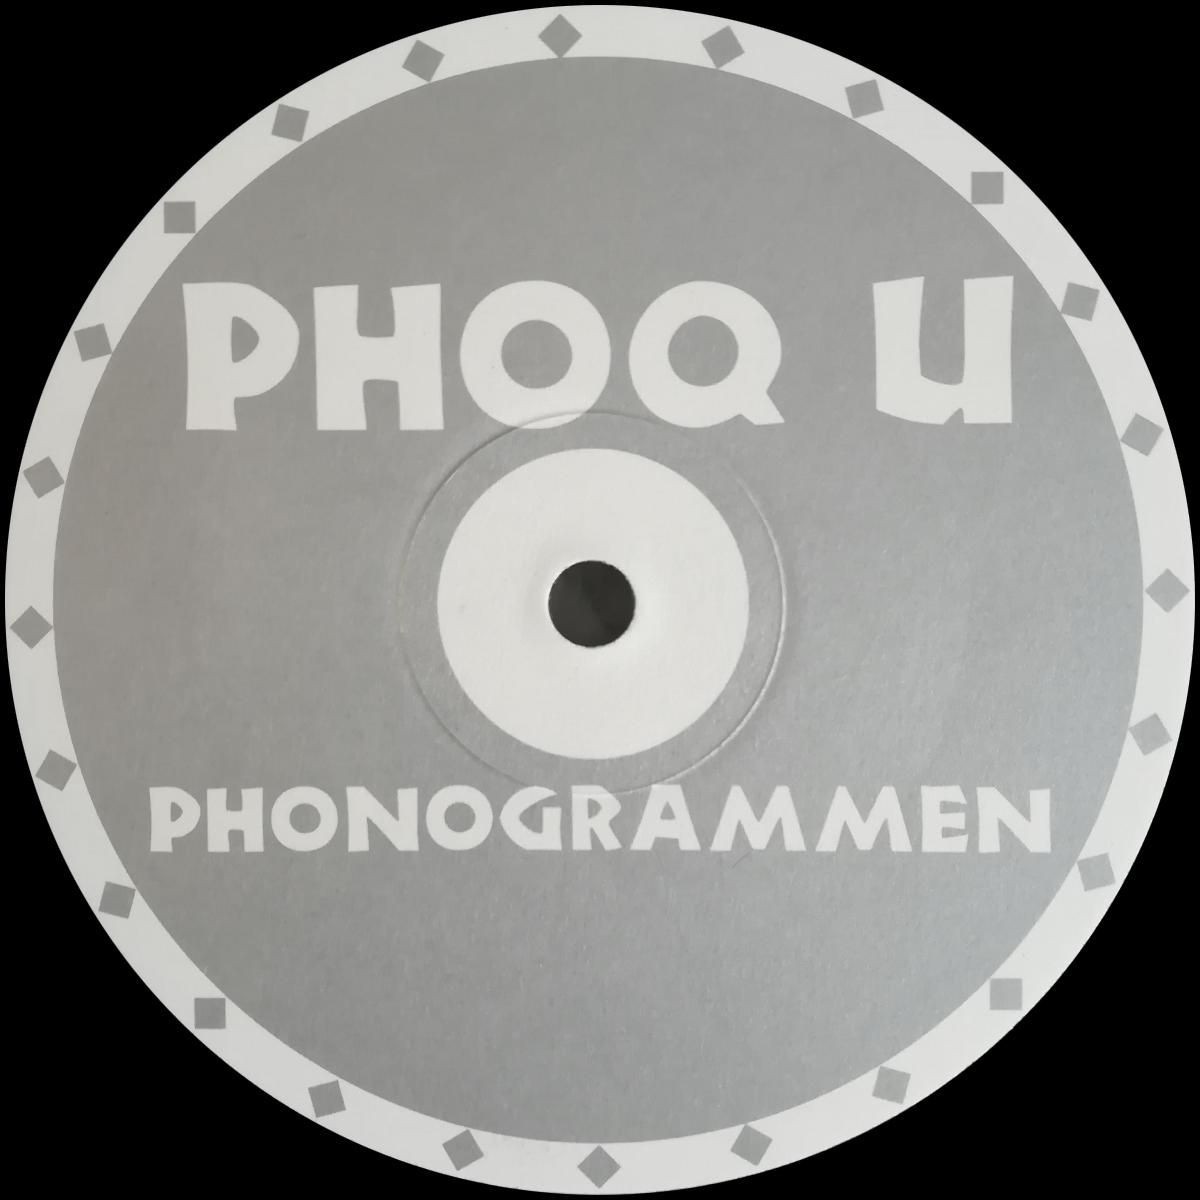 Pieces Of A Pensive State Of Mind  - Crossin' The Madmoon EP - PH.U.4 - PHOQ U PHONOGRAMMEN